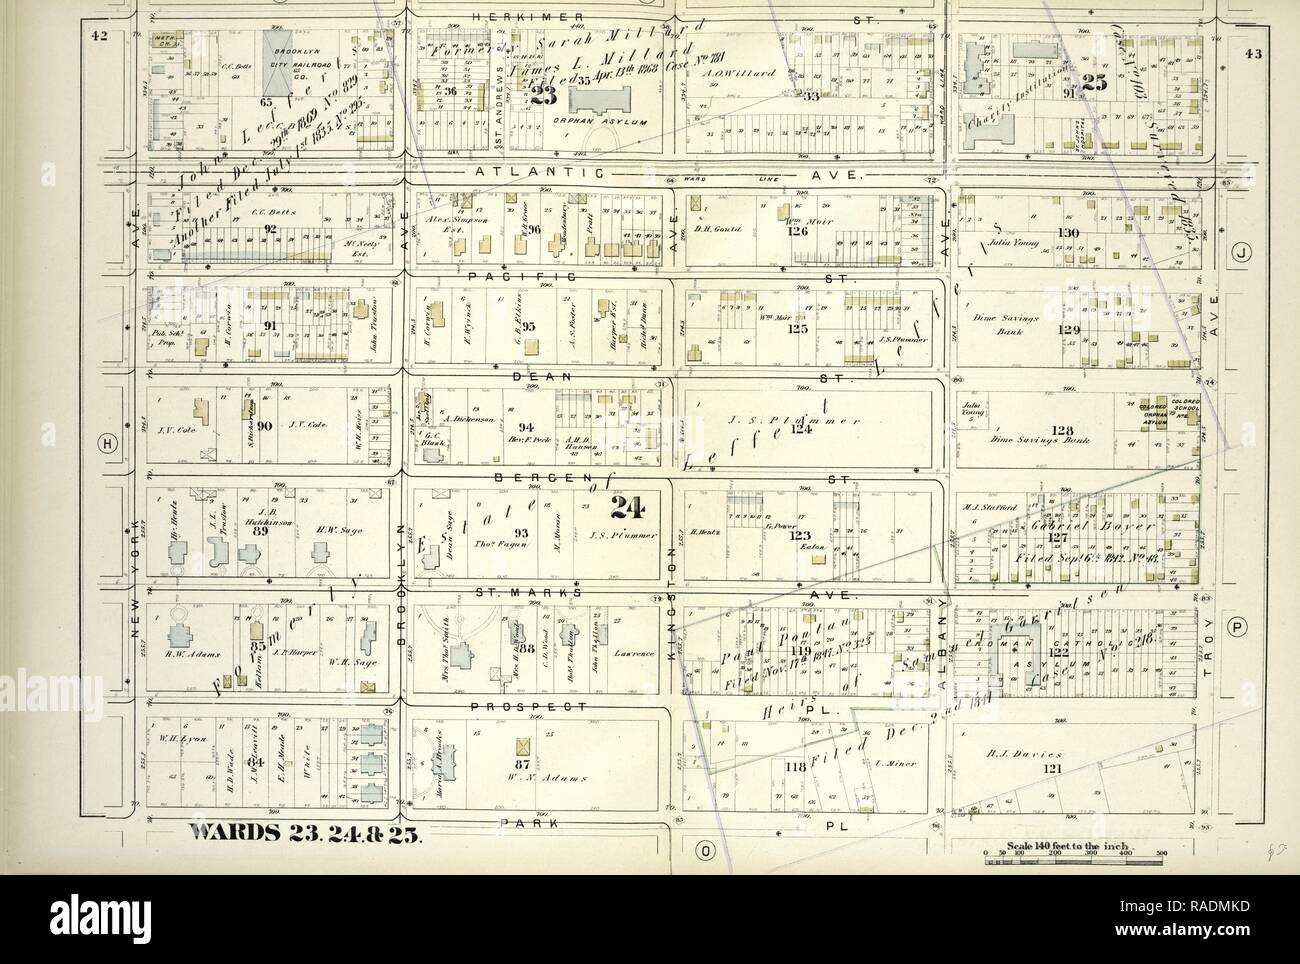 Vol. 1. Plate, I. Map bound by Herkimer St., Troy Ave., Park Pl., New York Ave., Including Atlantic Ave., Atlantic reimagined Stock Photo